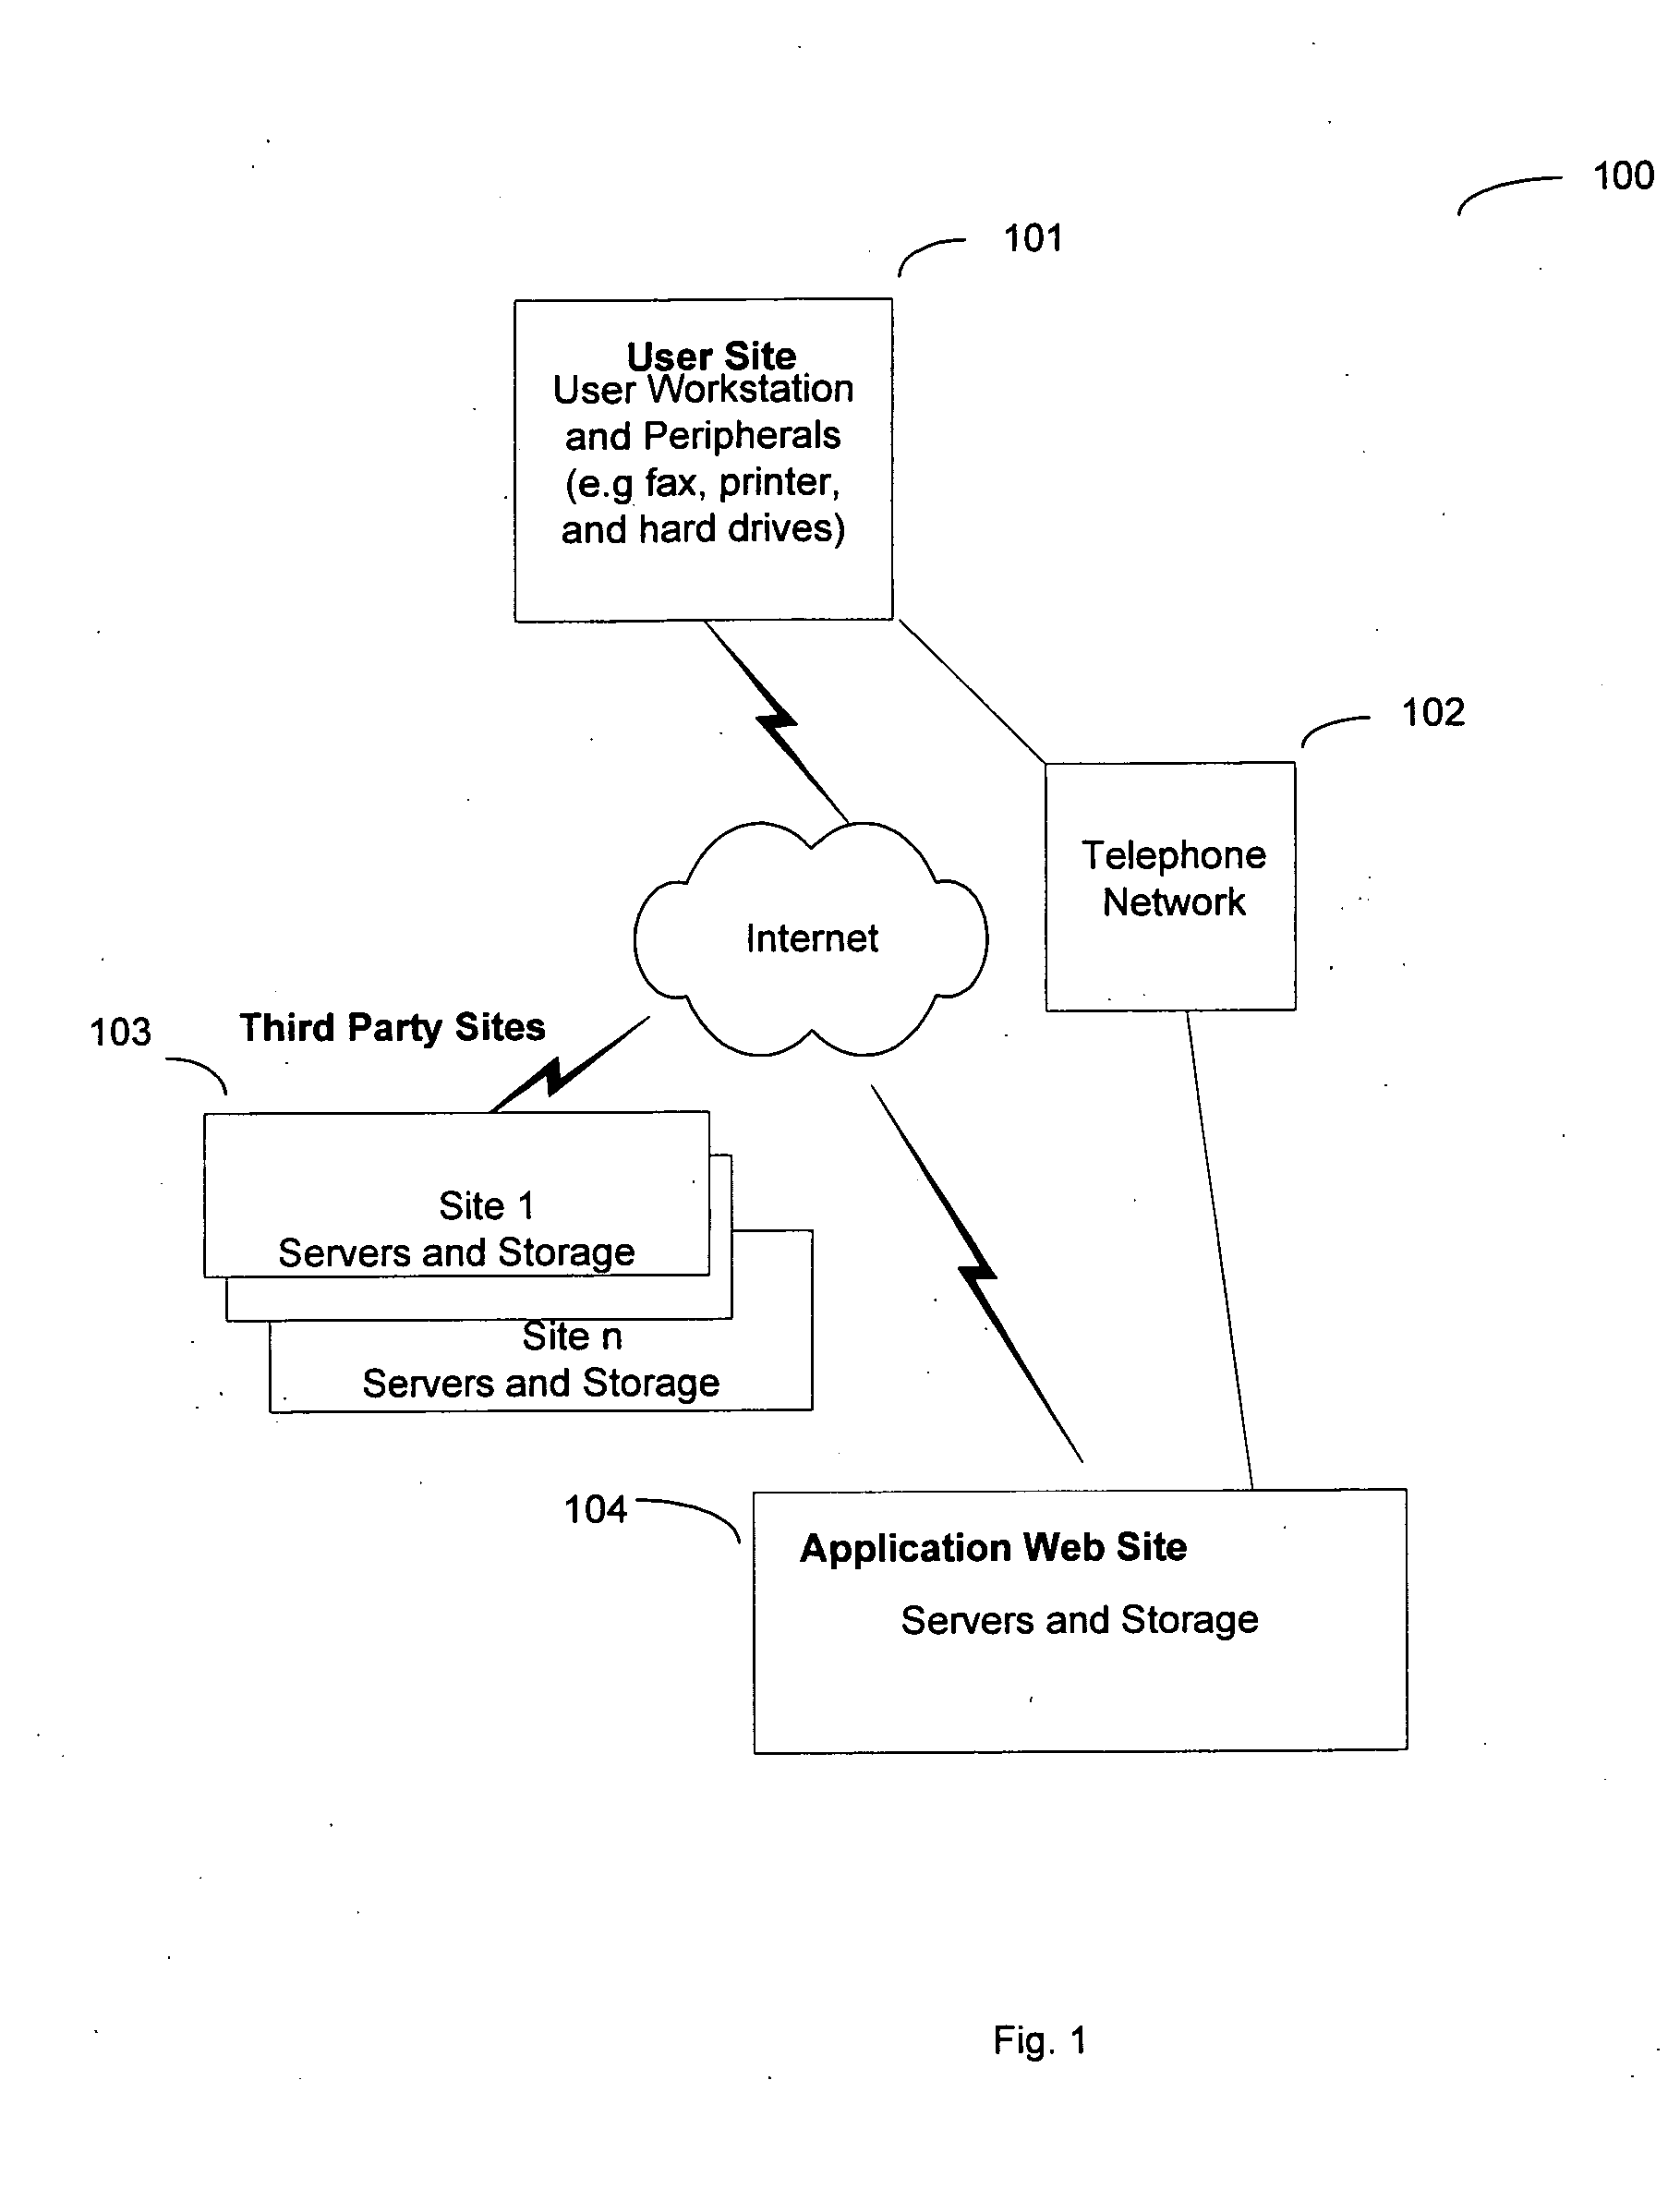 Method and system to edit and analyze longitudinal personal health data using a web-based application